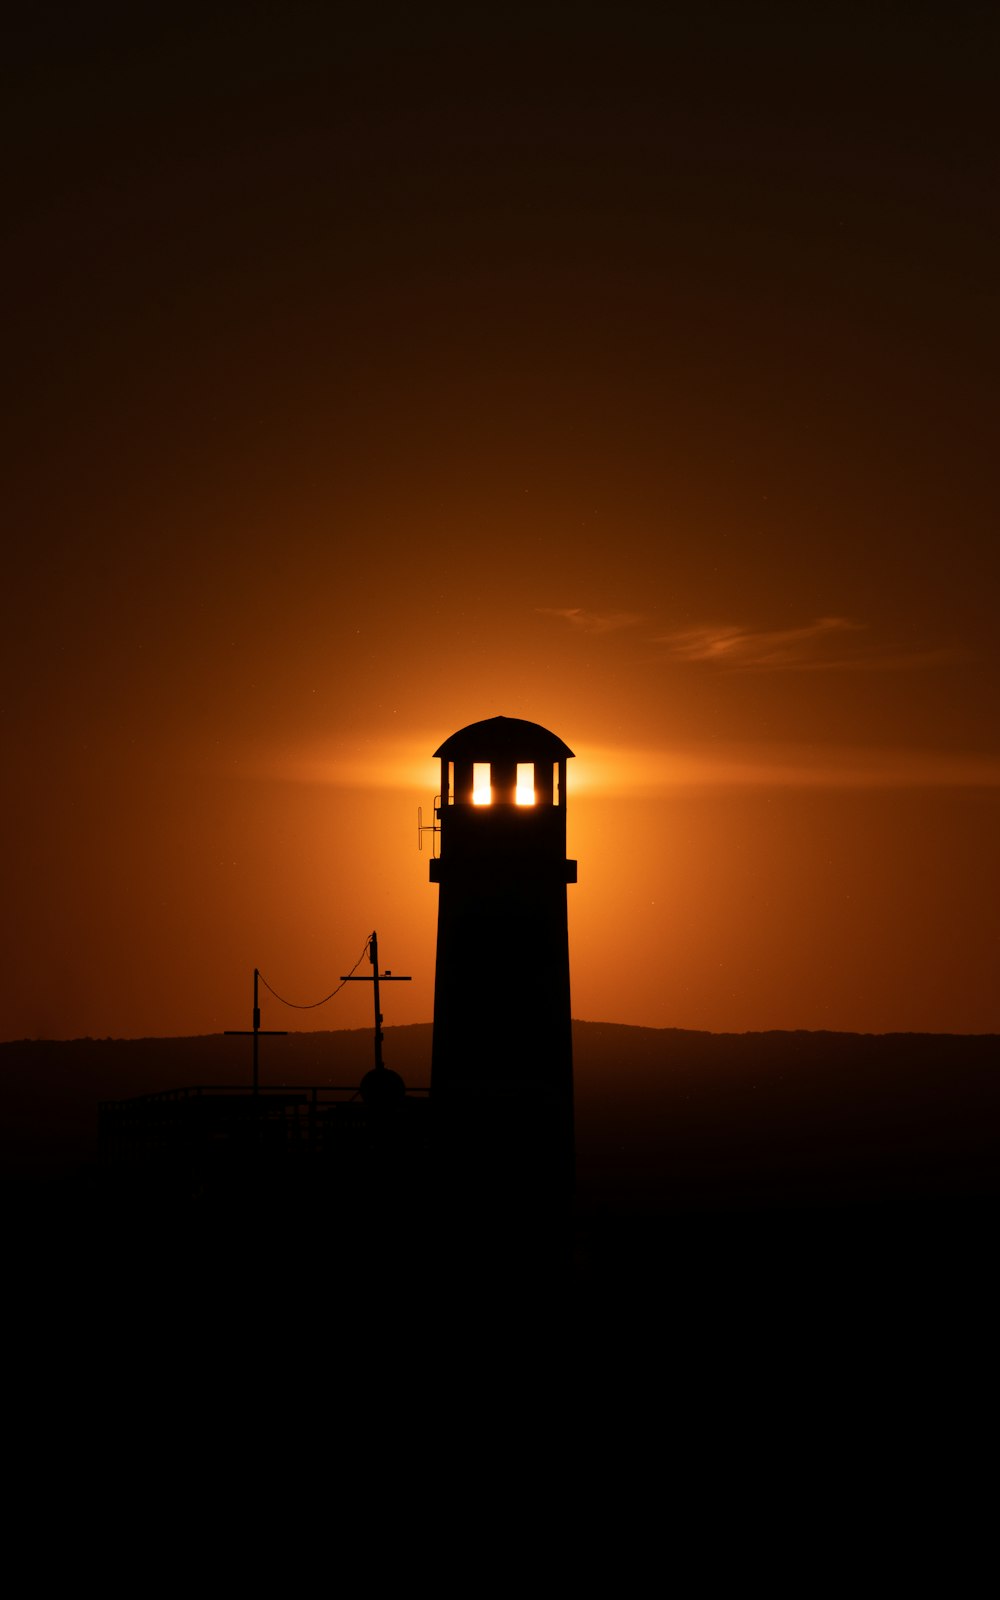 the sun is setting behind a light house